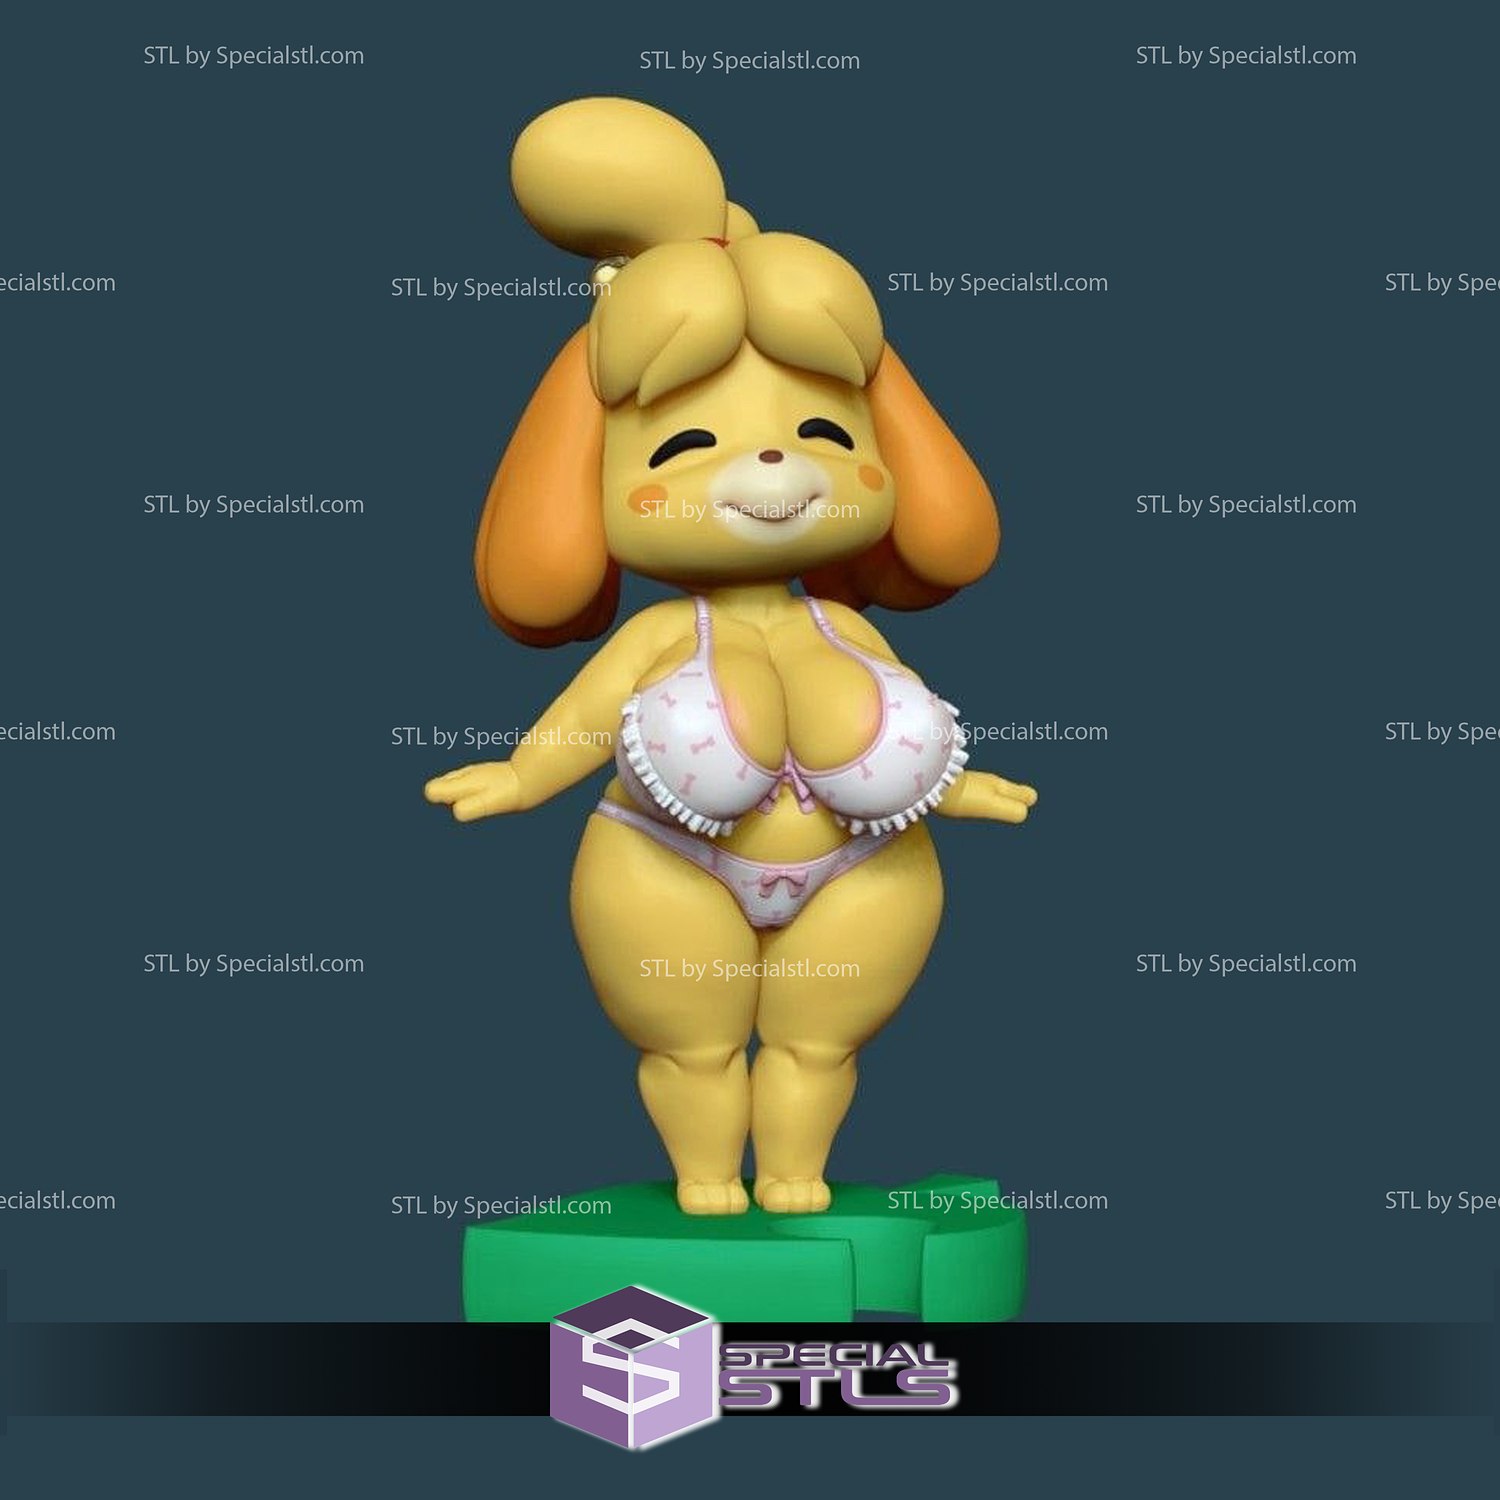 Animal crossing isabelle nsfw